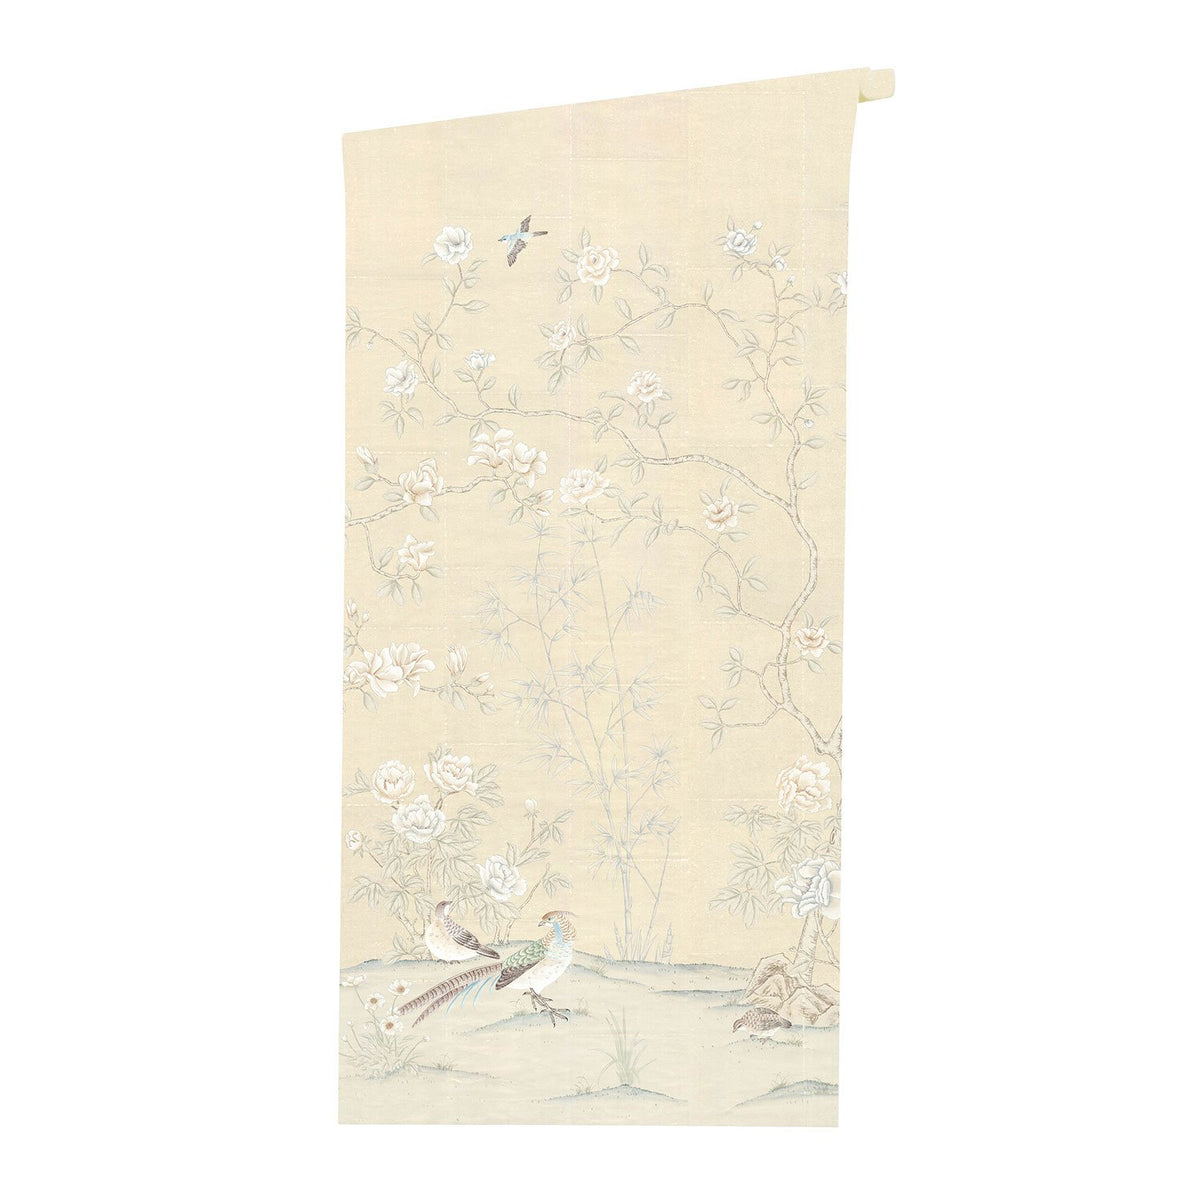 Vincennes in Cream Chinoiserie Wallpaper Mural on Roll